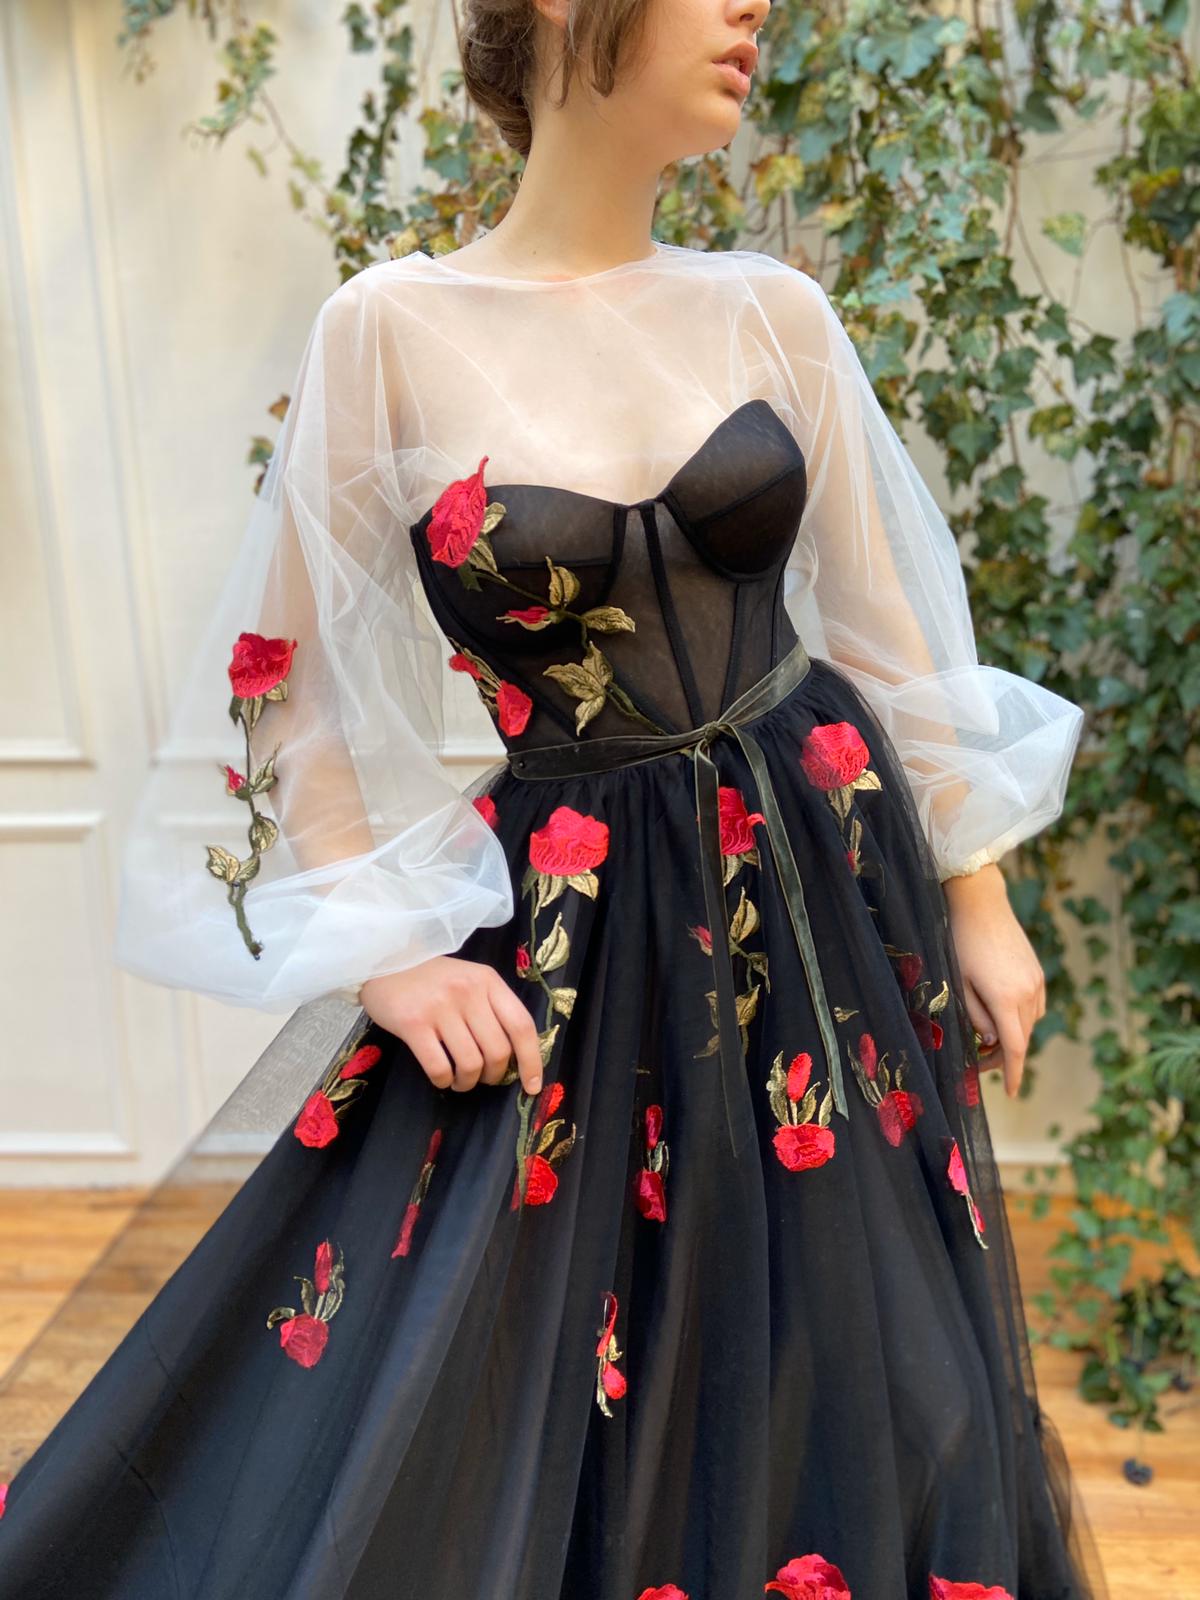 Black A-Line dress with long sleeves and embroidery